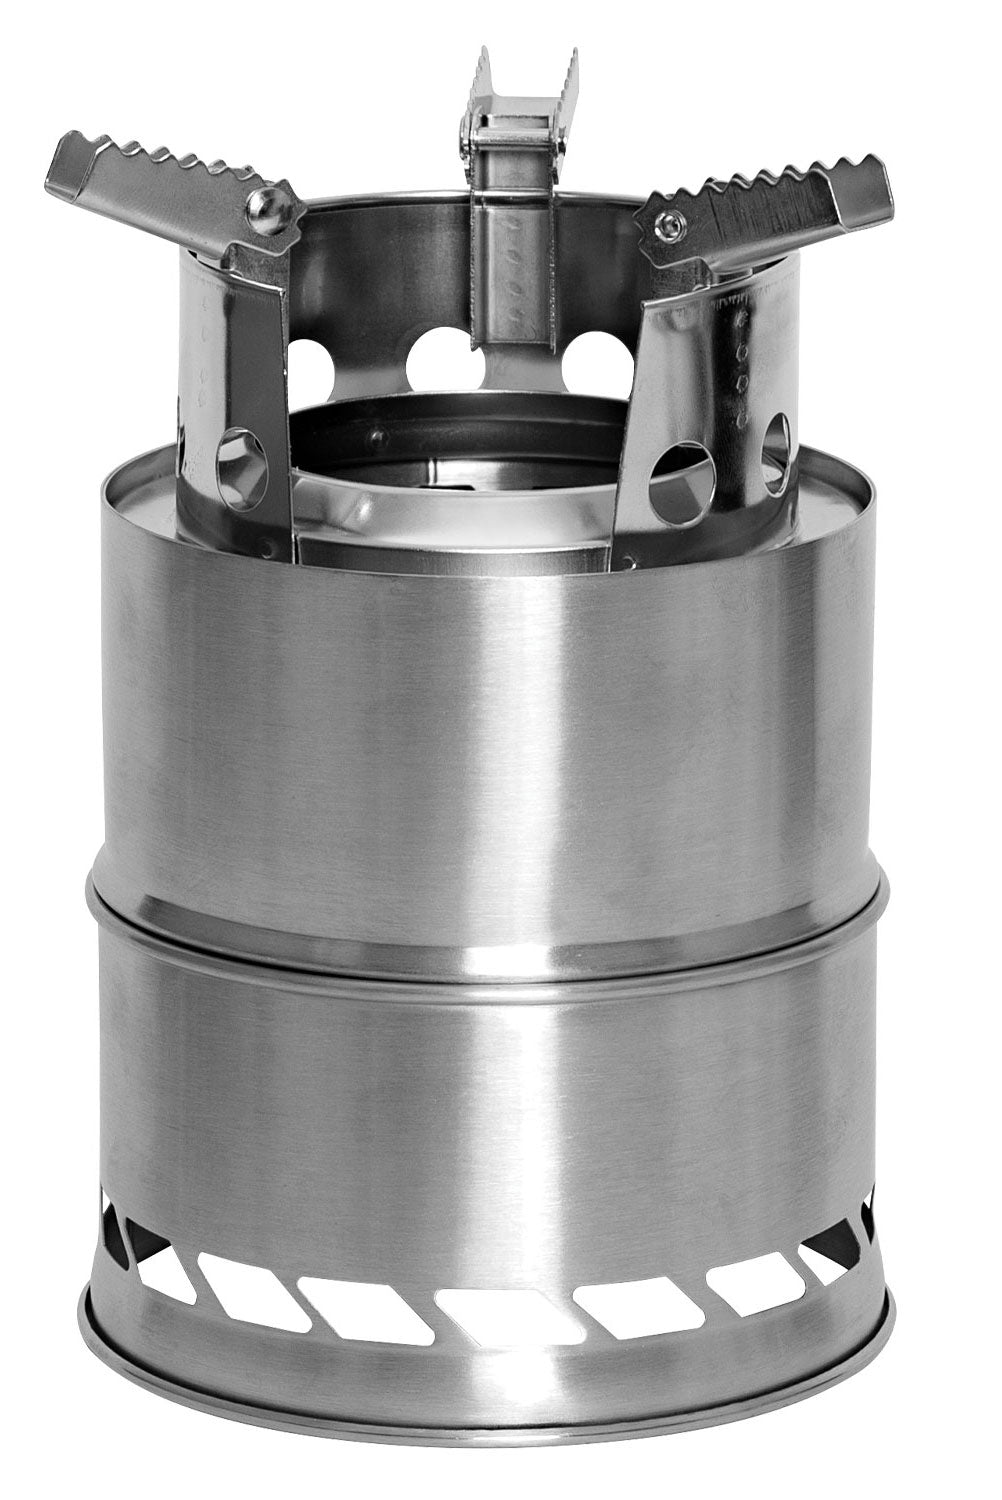 Stainless Steel Portable Camping / Backpacking Stove - Tactical Choice Plus